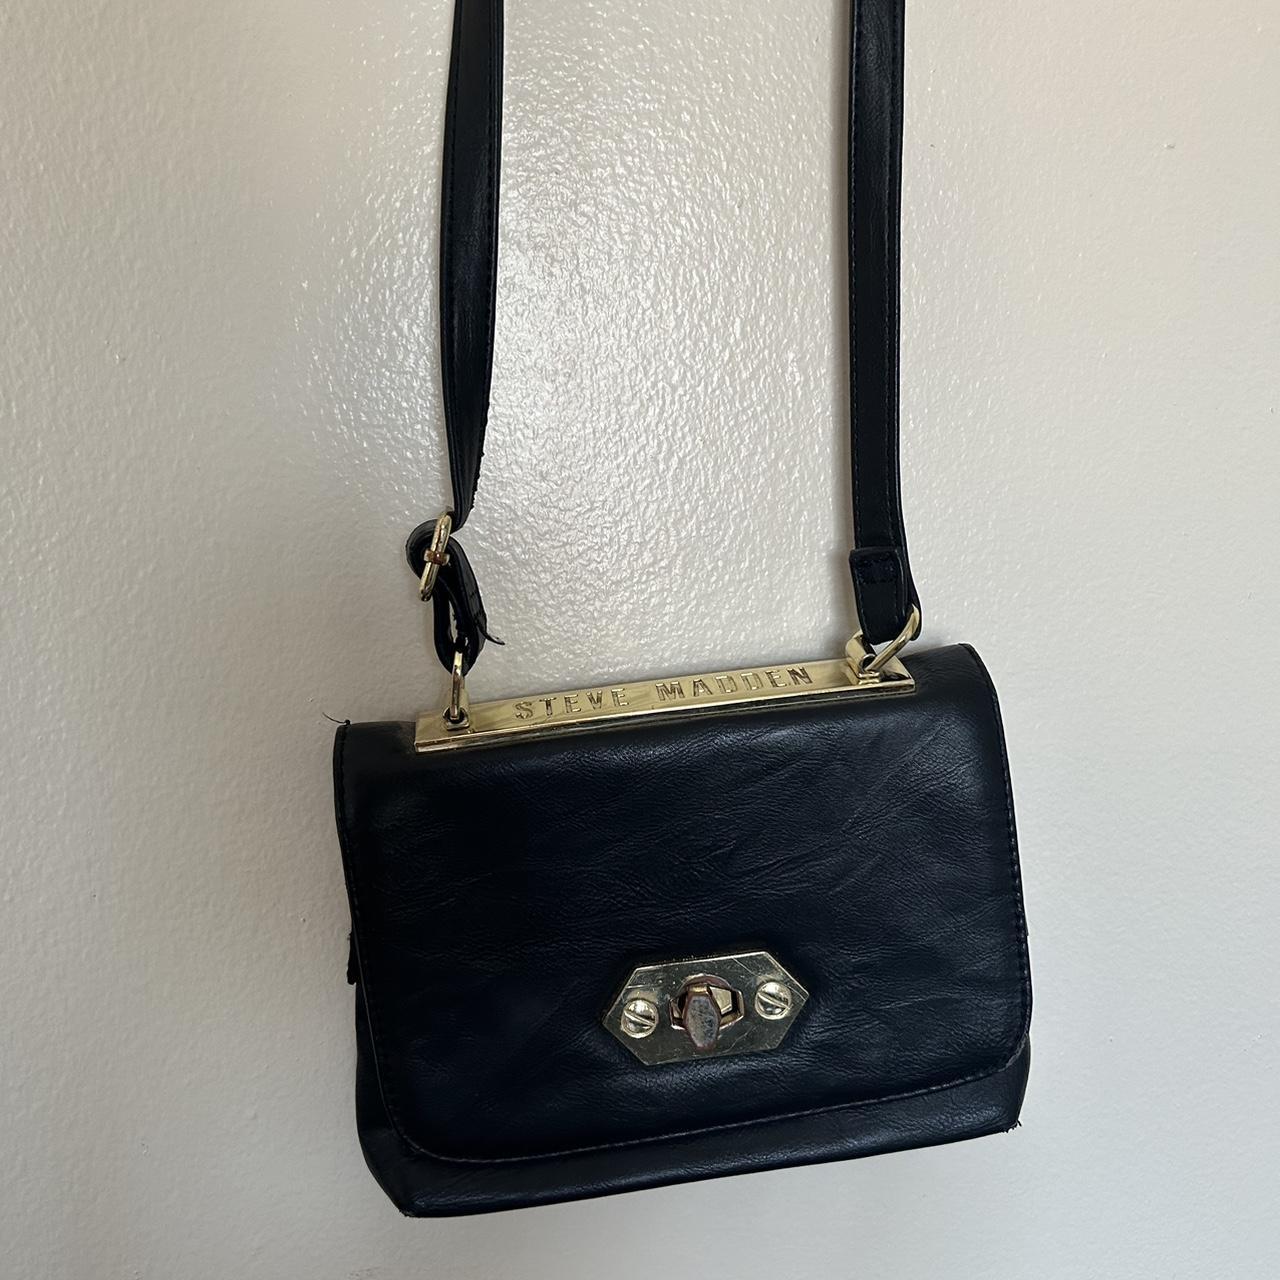 Steve Madden Black Cross Body Purse with Gold Accent Chain